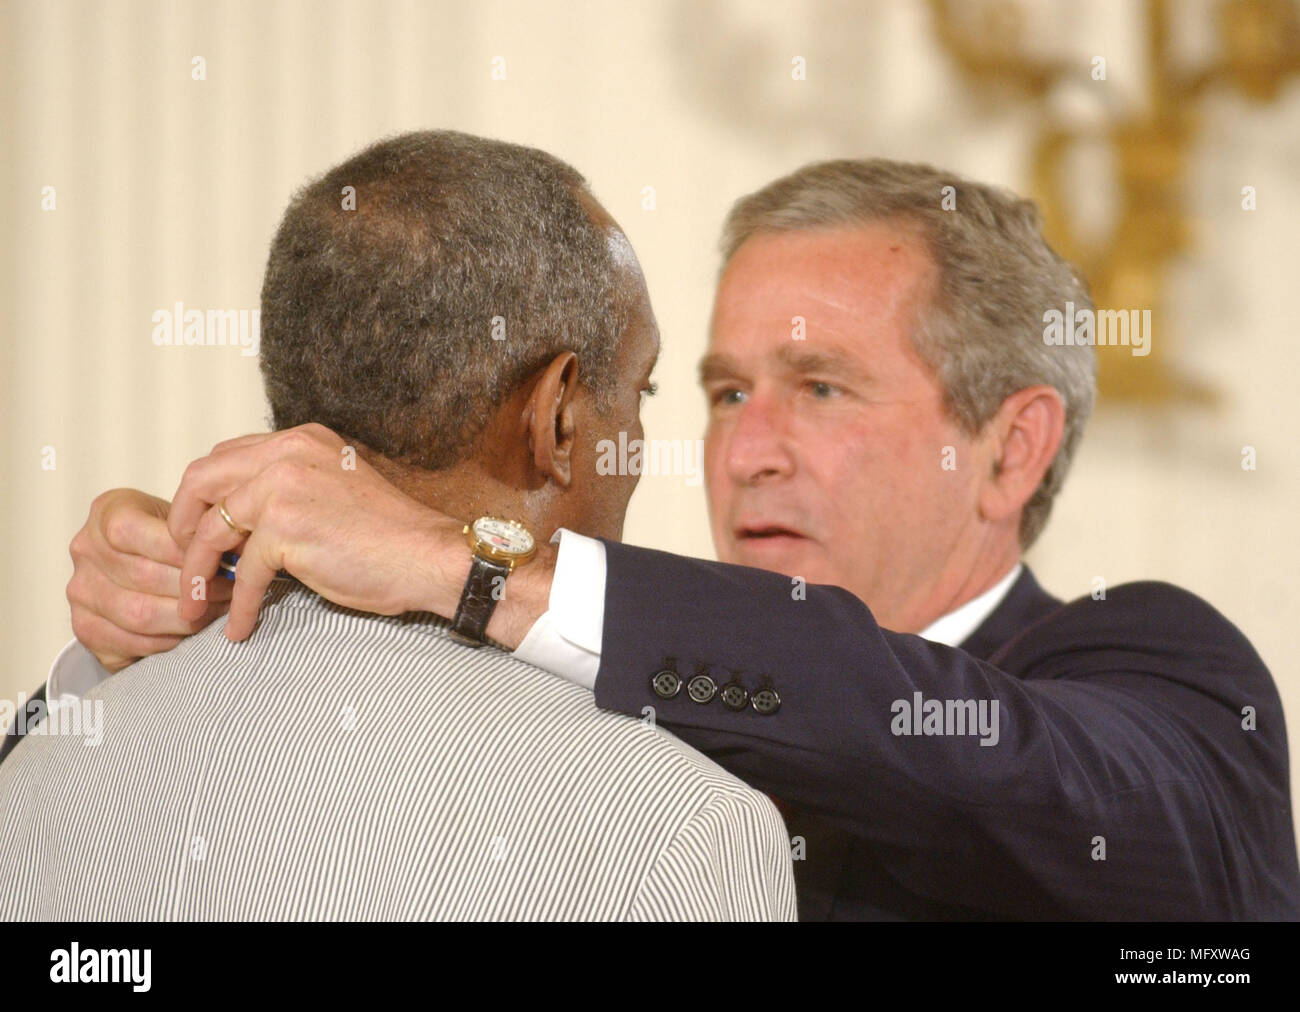 Washington, DC - July 9, 2002 -- United States President George W. Bush honors Bill Cosby with the Presidential Medal of Freedom during a ceremony in the East Room of the White House in Washington, DC on July 9, 2002.Credit: Ron Sachs/CNP /MediaPunch Stock Photo